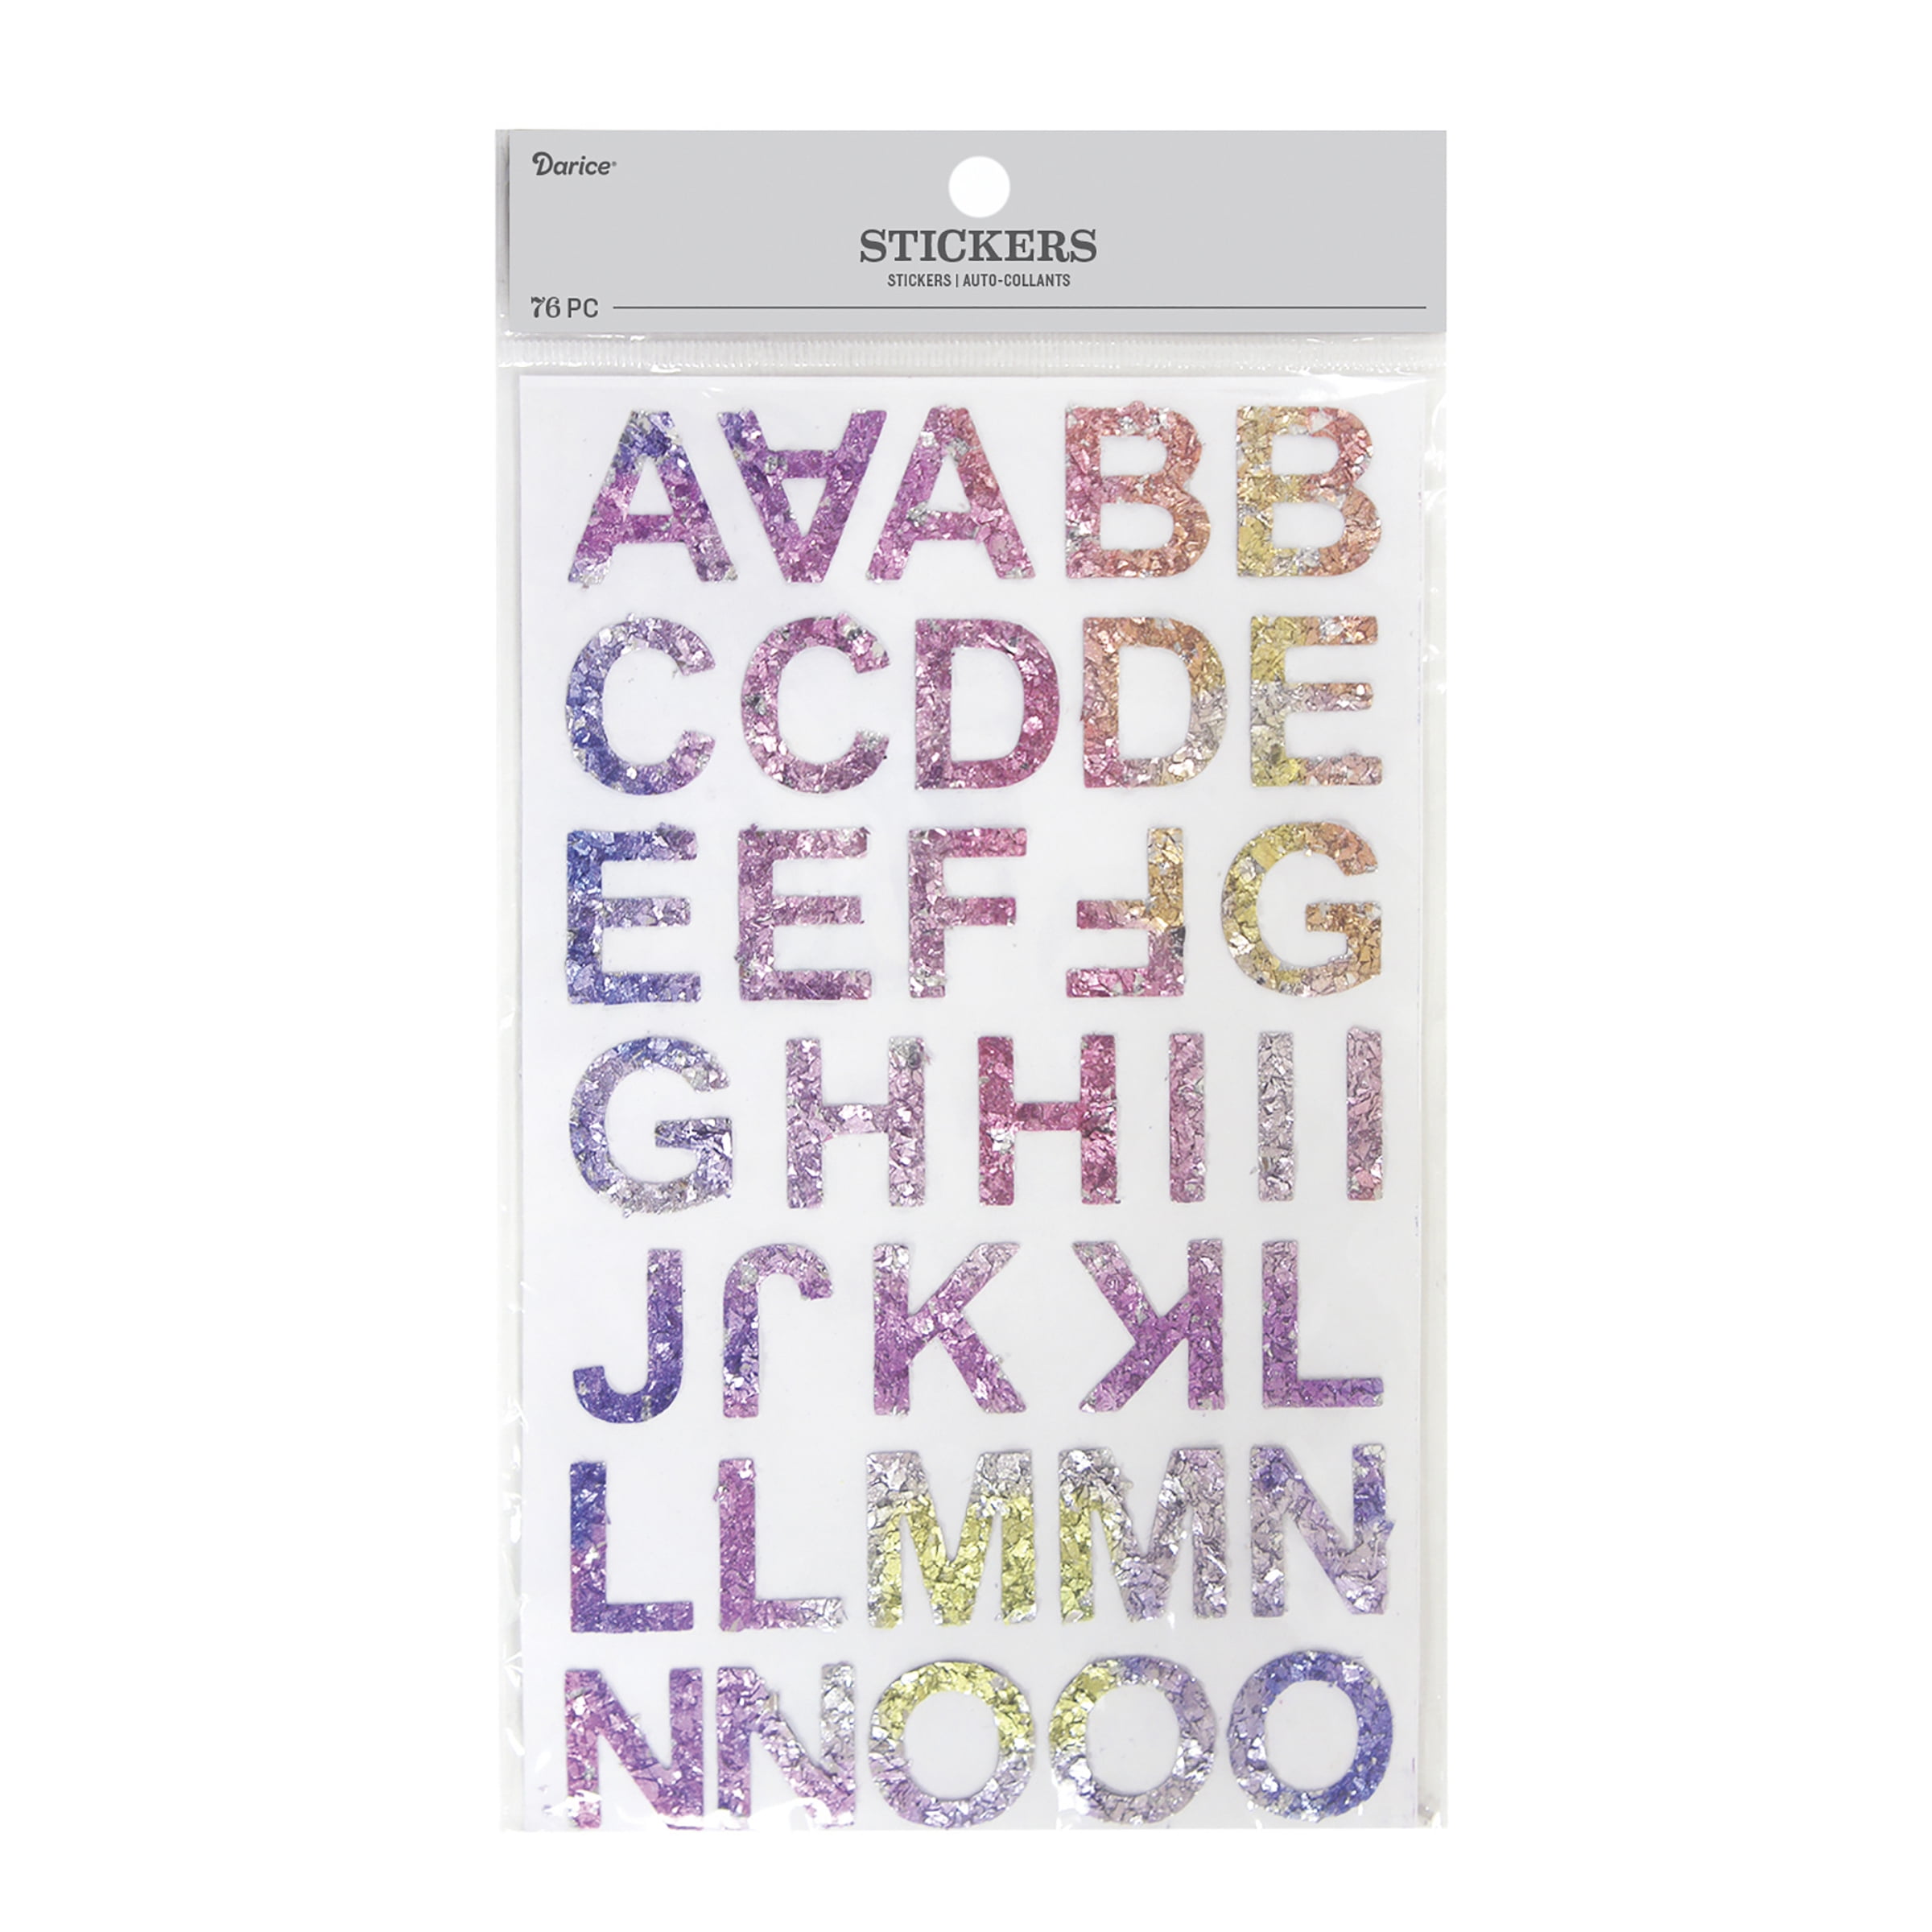 SELF ADHESIVE LETTERS stickers graphics Serif 20mm OR 25mm high vinyl alphabet 